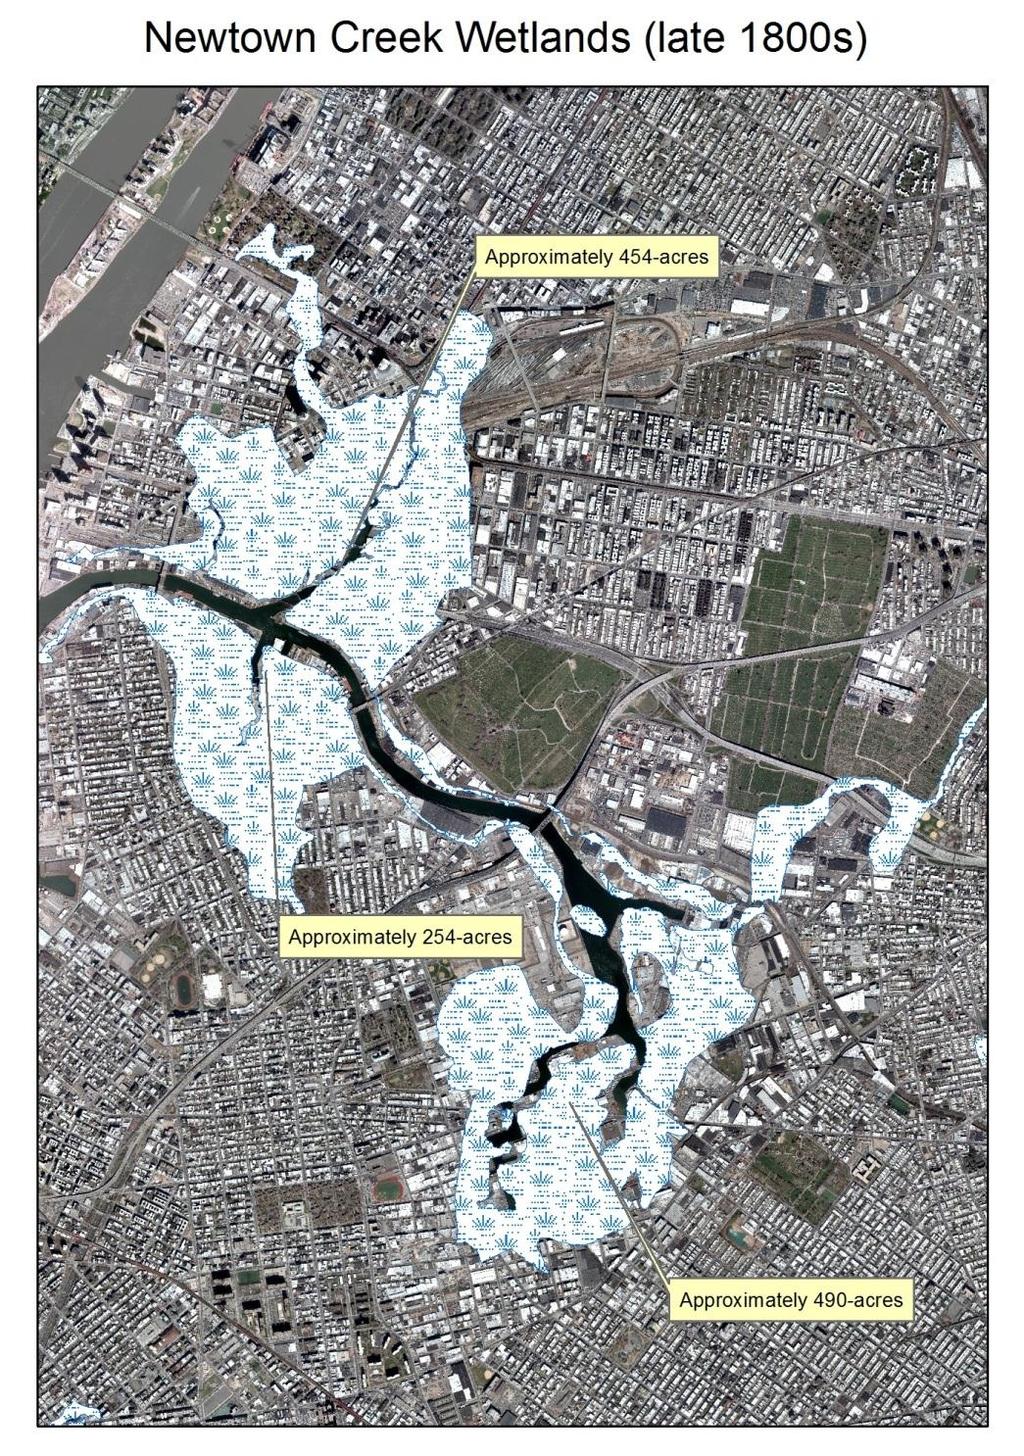 Newtown Creek Historic Wetland Coverage Historically, there were approximately 1,200-acres of tidal wetland along the